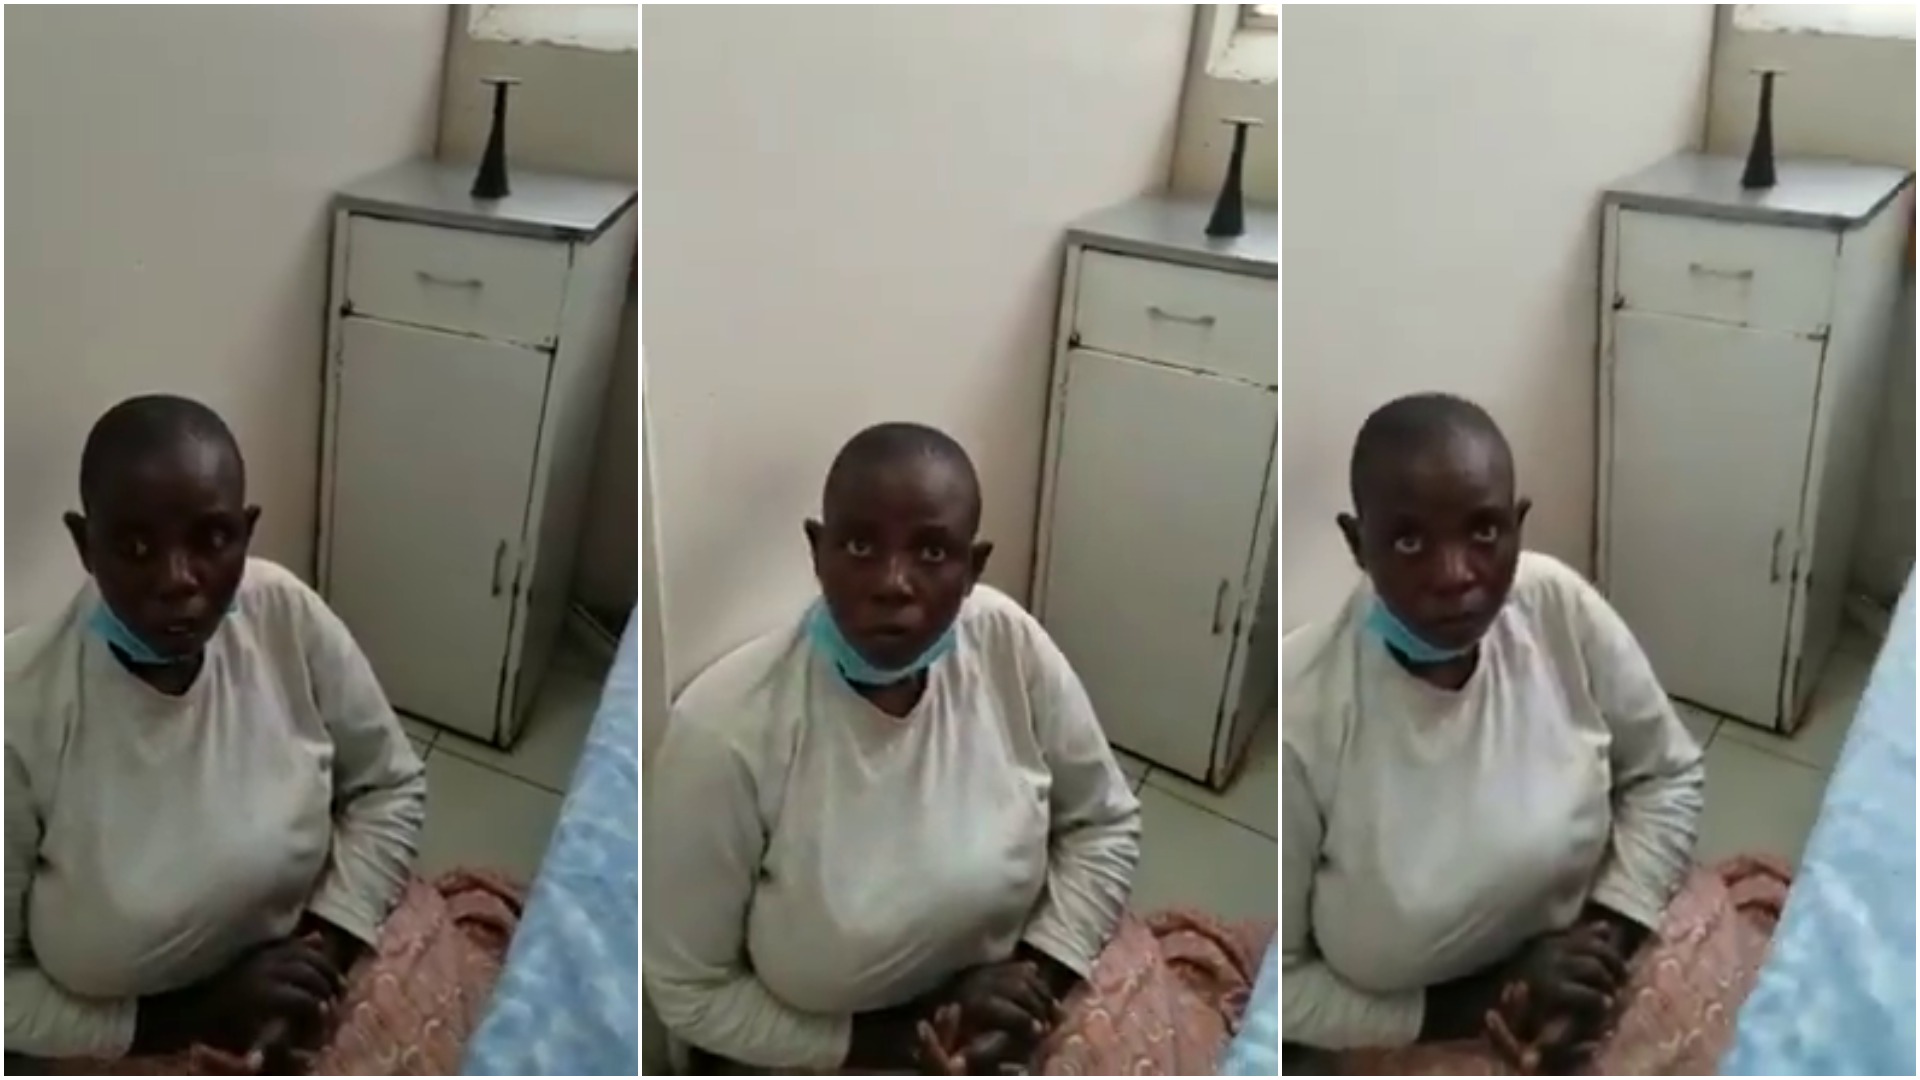 Baby Snatcher Caught At Hospital...Confesses To Selling Babies For Rituals